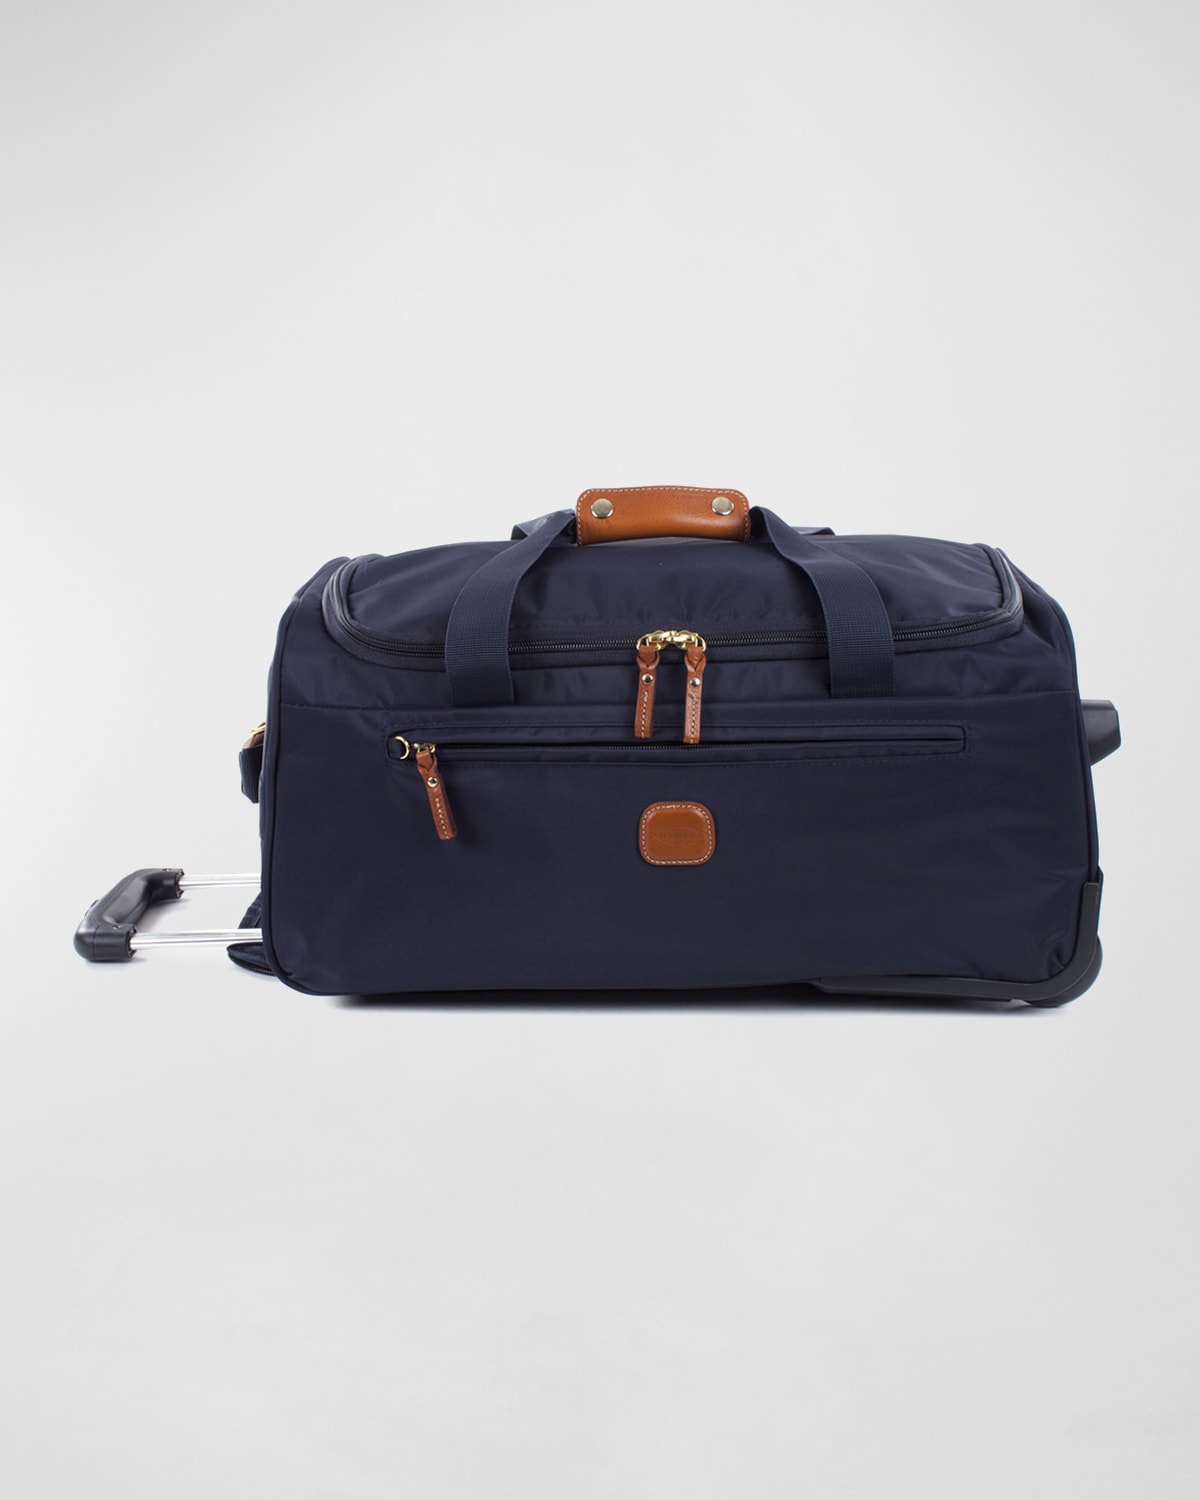 Bric's Navy X-Bag 21" Carry-On Rolling Duffel Luggage